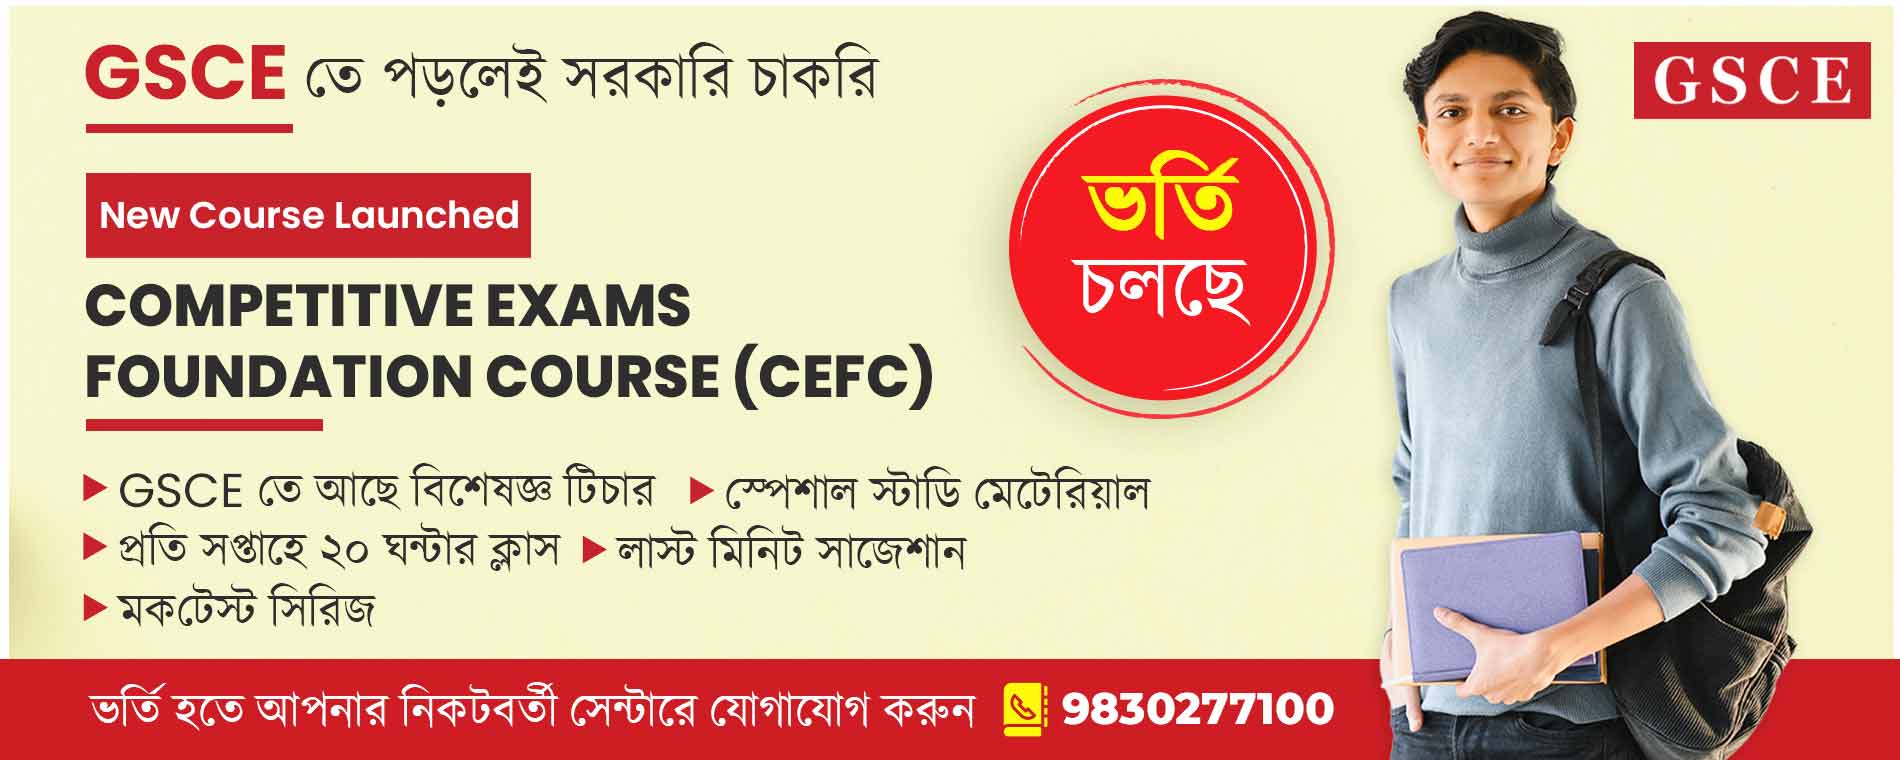 Competitive Exams Foundation Course (CSCF) - Prepare for success in competitive exams with this comprehensive foundation course